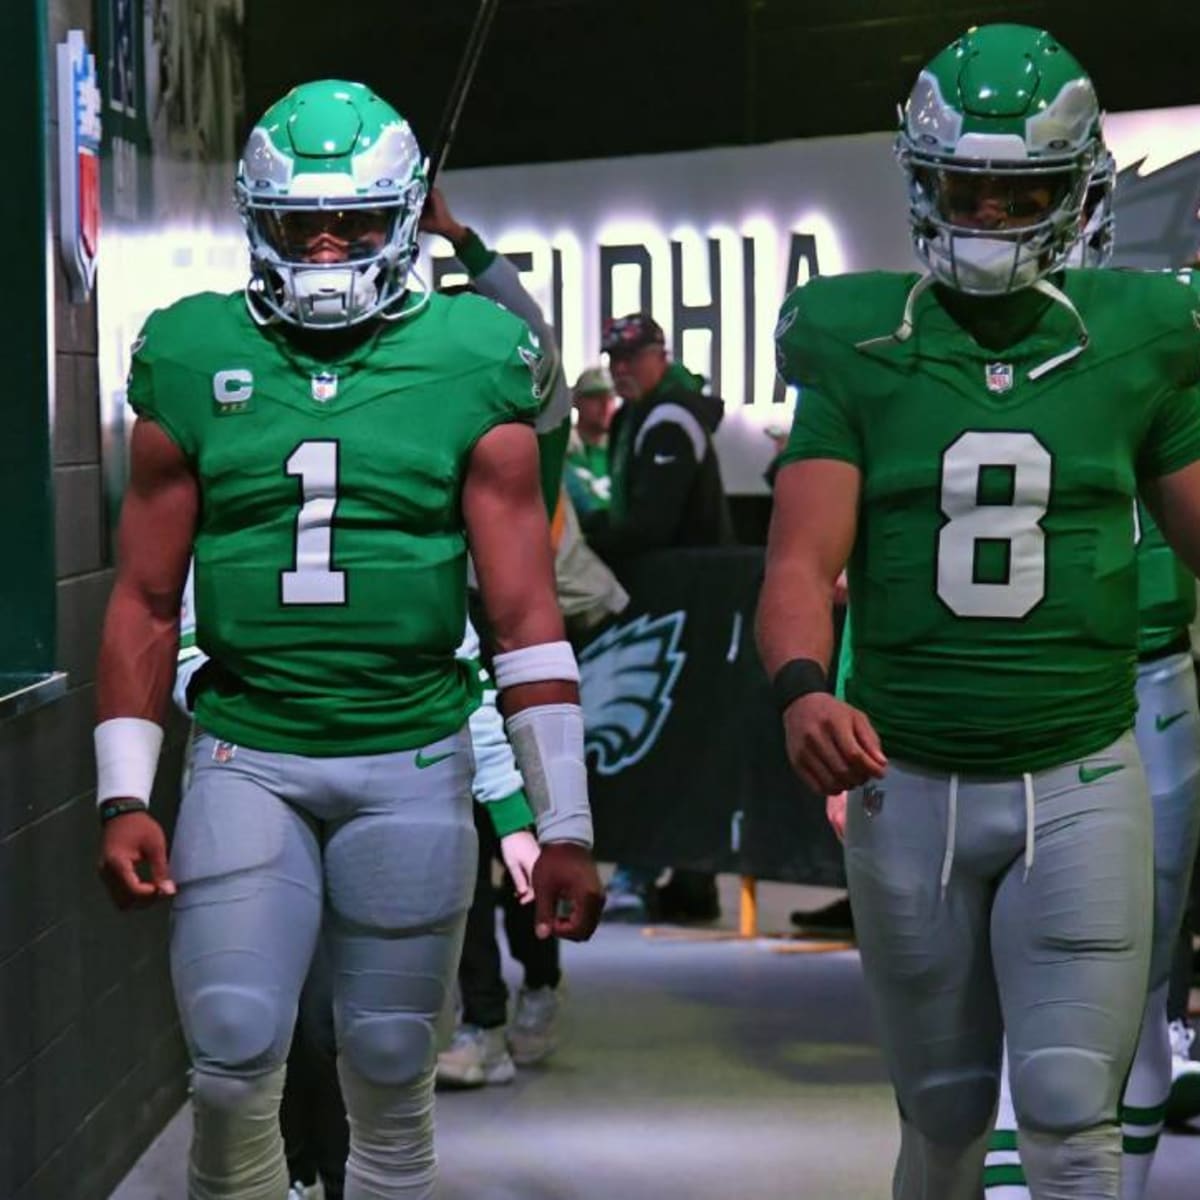 Eagles' Throwback Kelly Green Uniforms Were Absolutely Loved by NFL Fans -  Sports Illustrated